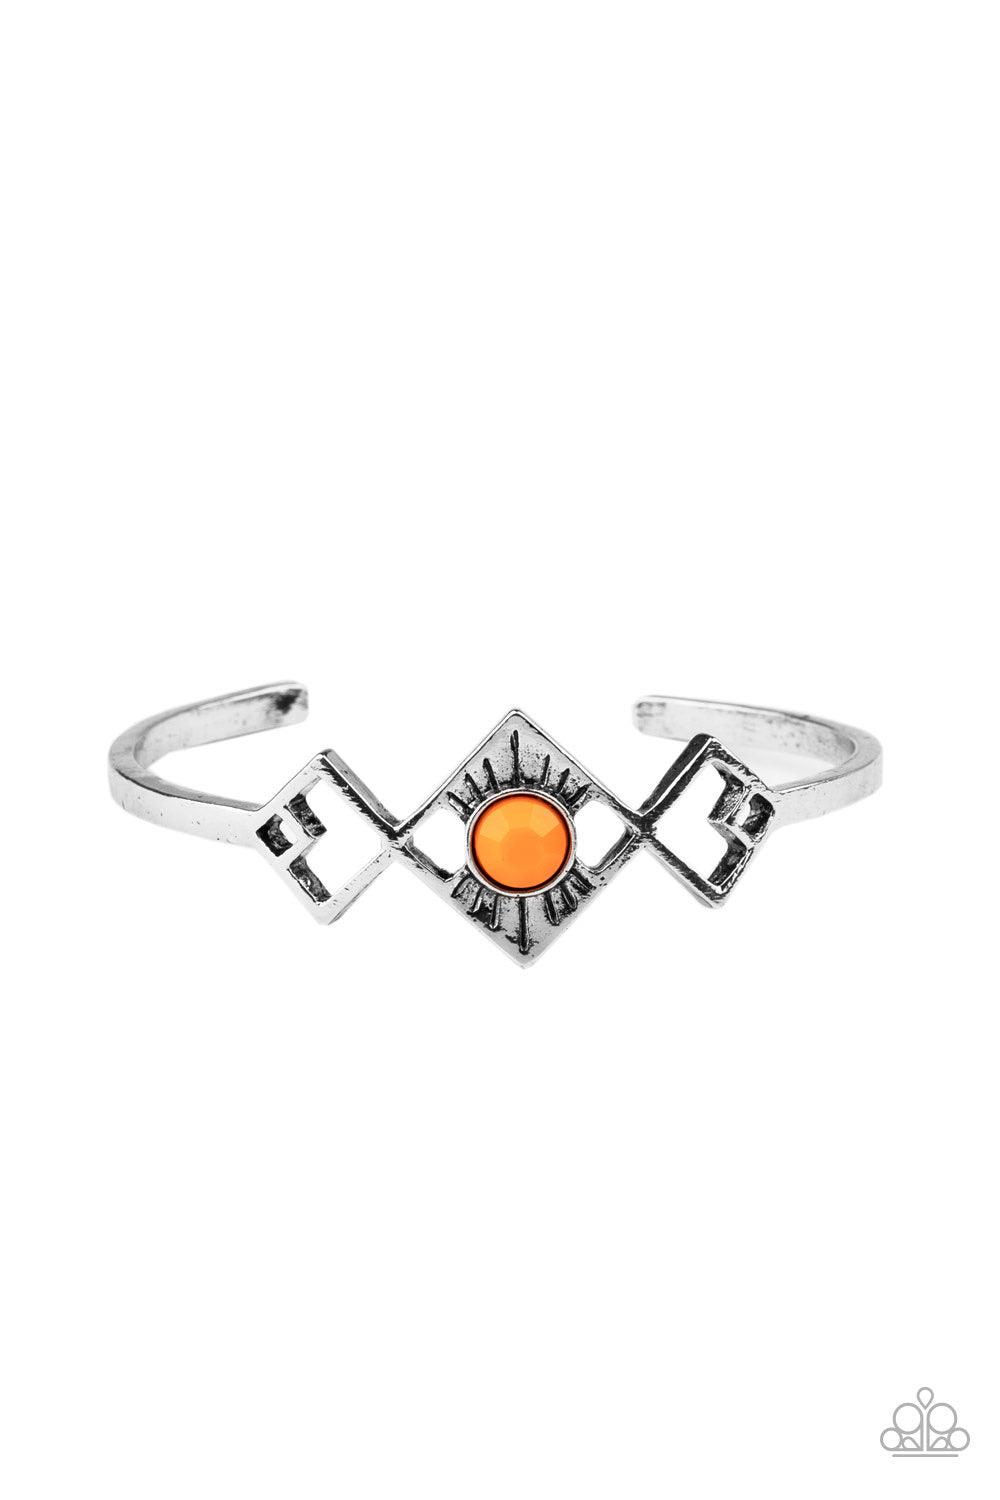 Paparazzi Accessories Dainty Deco - Orange Featuring an orange beaded center, tilted square frames attach to a dainty silver cuff, creating an abstract centerpiece. Sold as one individual bracelet. Jewelry